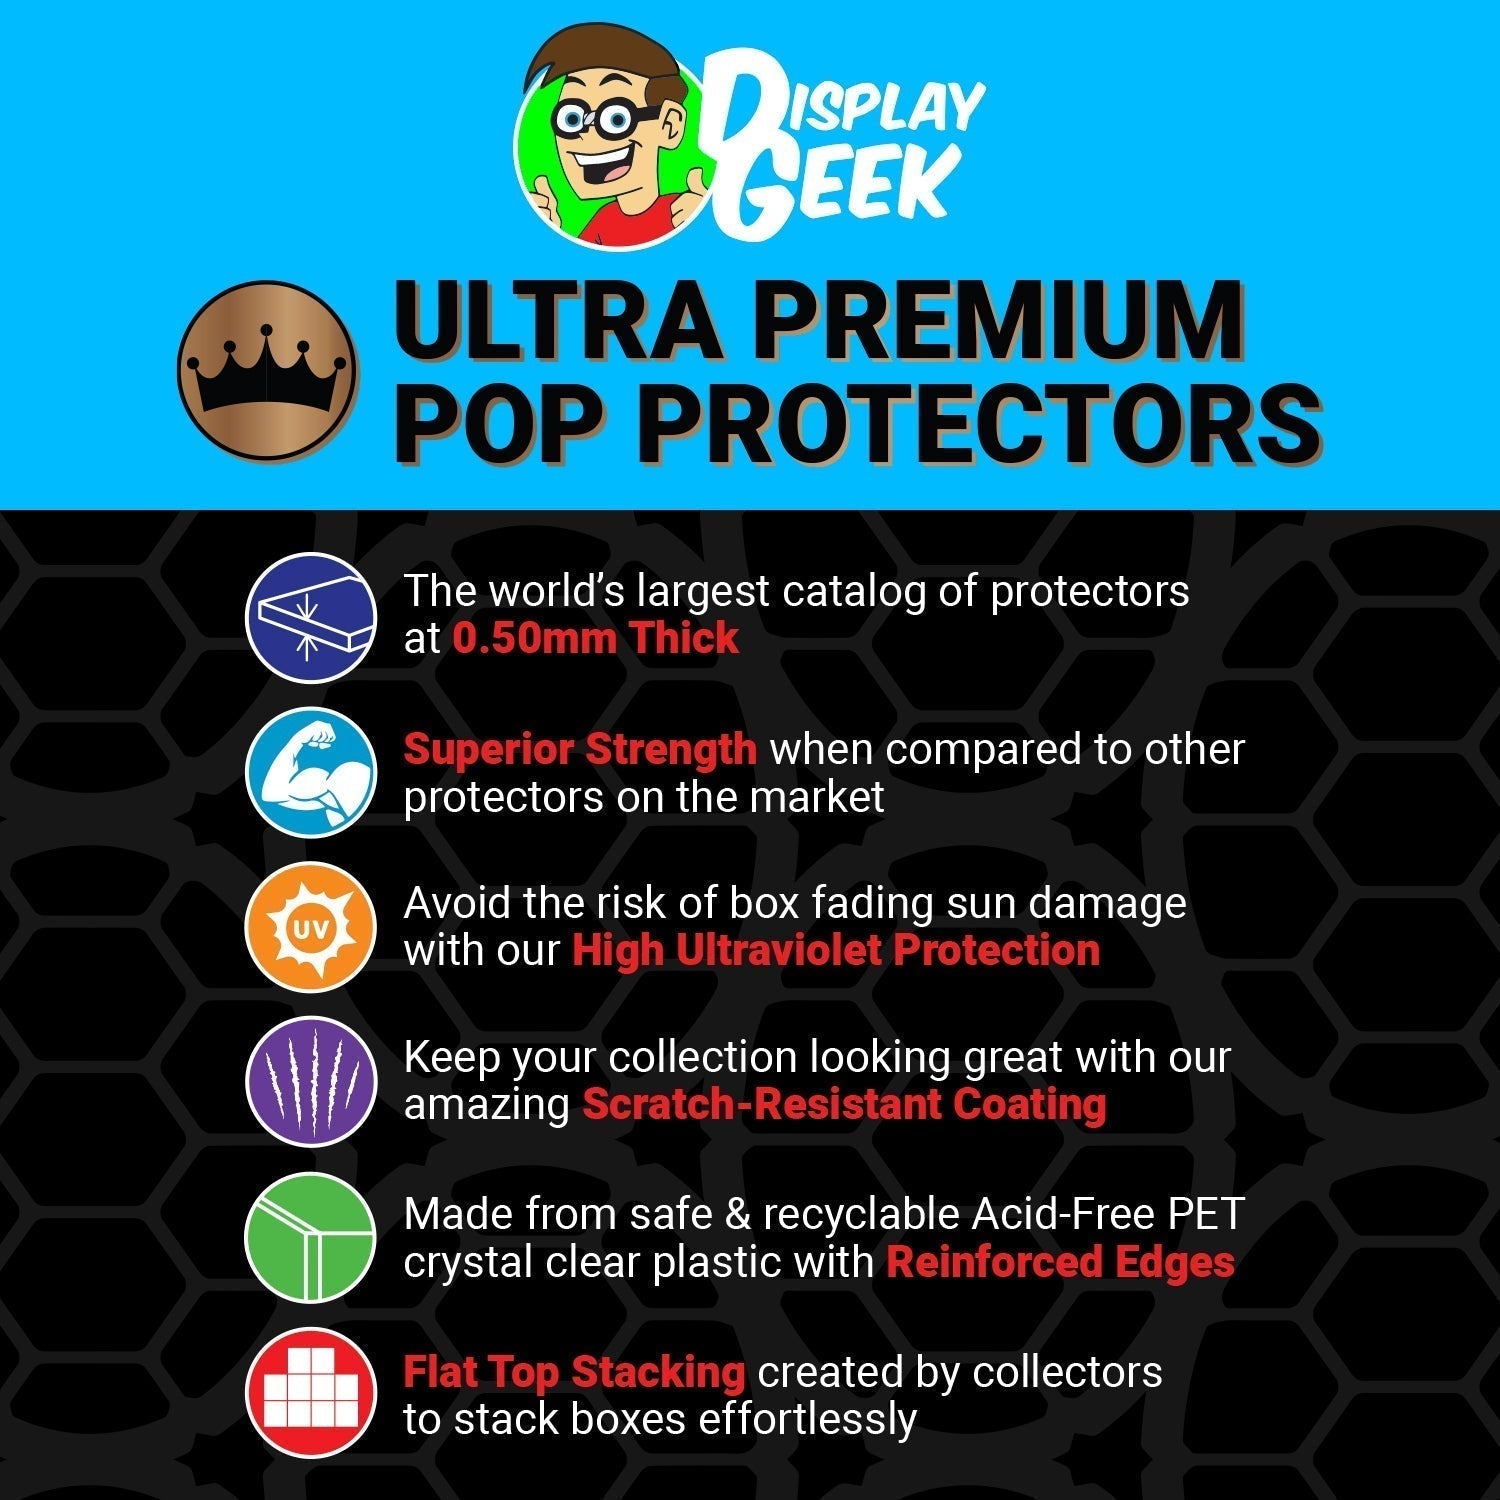 Pop Protector for Pop & Tee E.T. with Candy #1266 Funko Box - PPG Pop Protector Guide Search Created by Display Geek